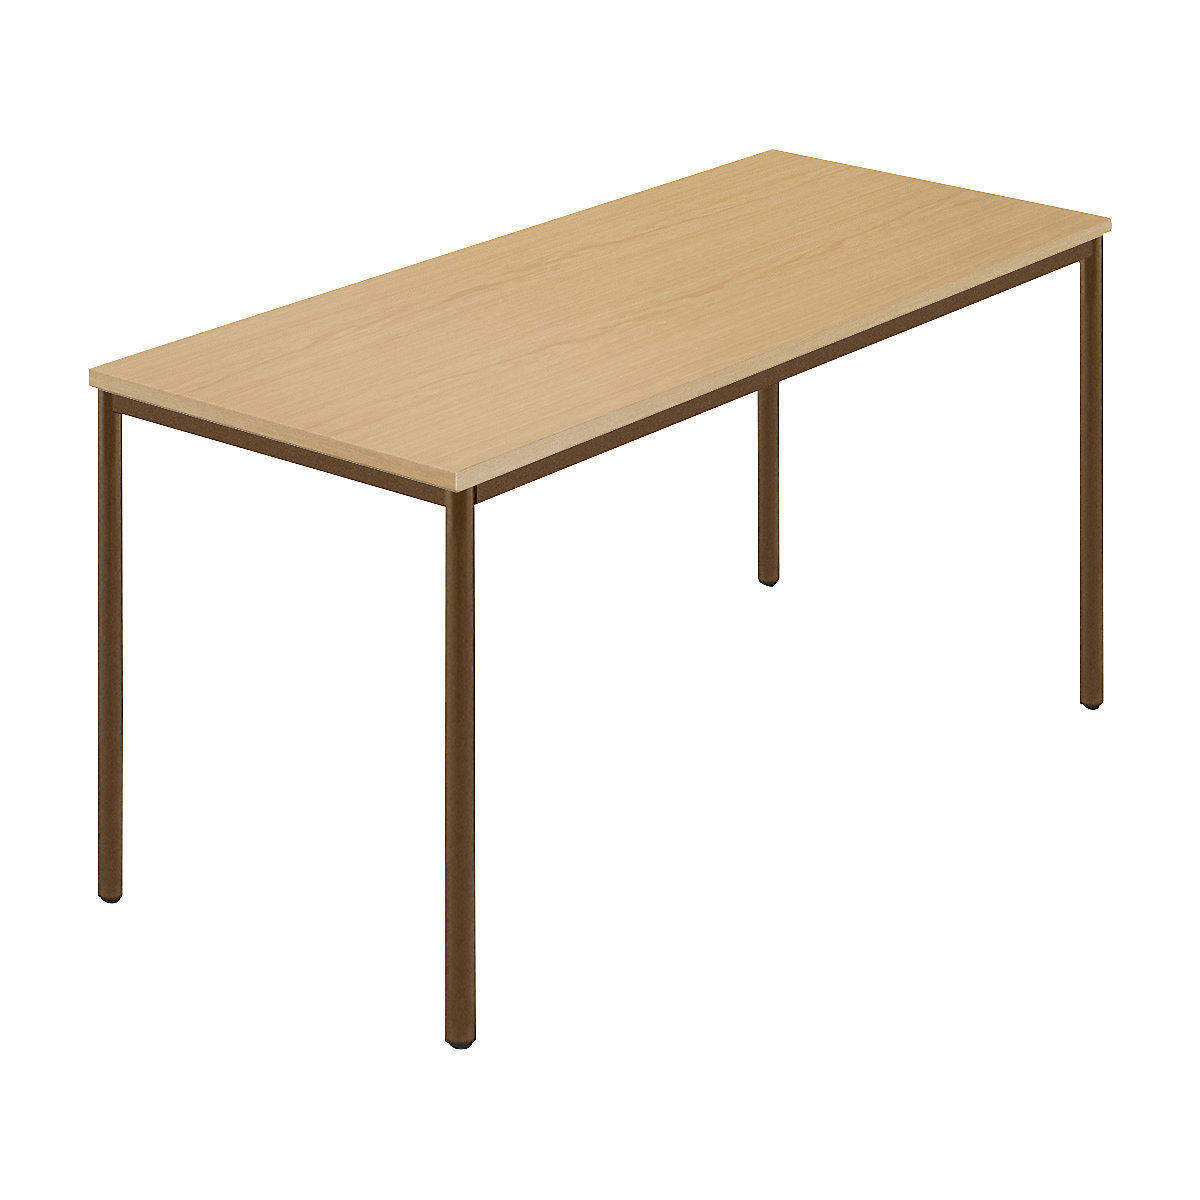 Rectangular table, coated round tubing, WxD 1400 x 700 mm, beech natural / brown-5